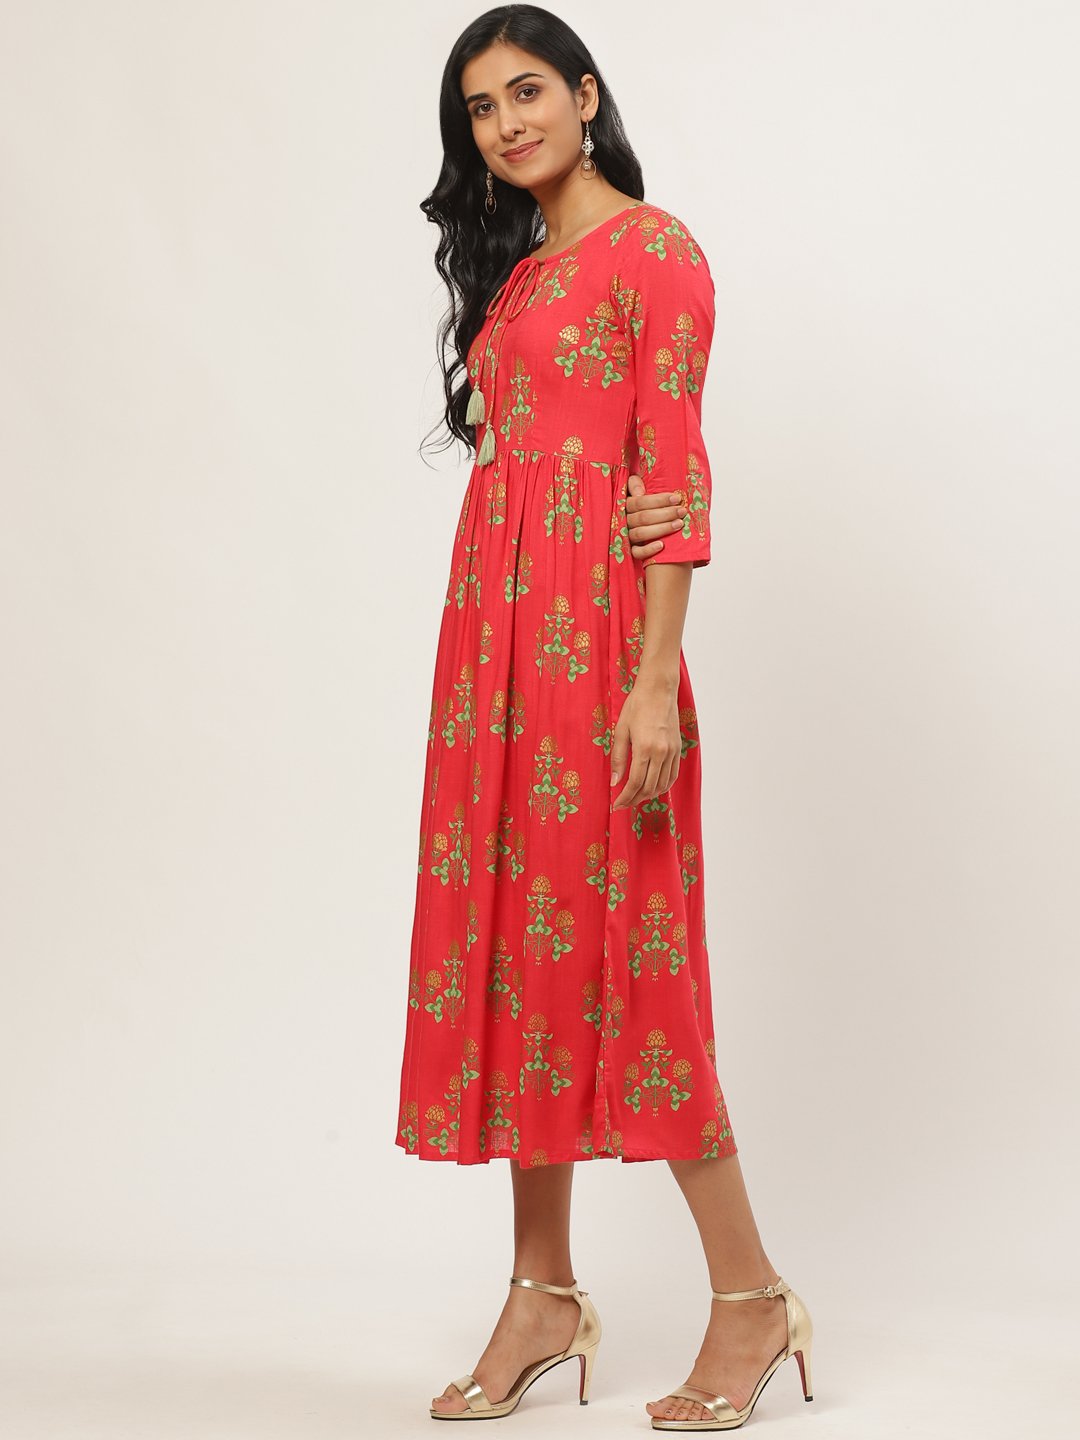 Women's Coral Floral Printed V-Neck Cotton Fit And Flare Dress - Nayo Clothing